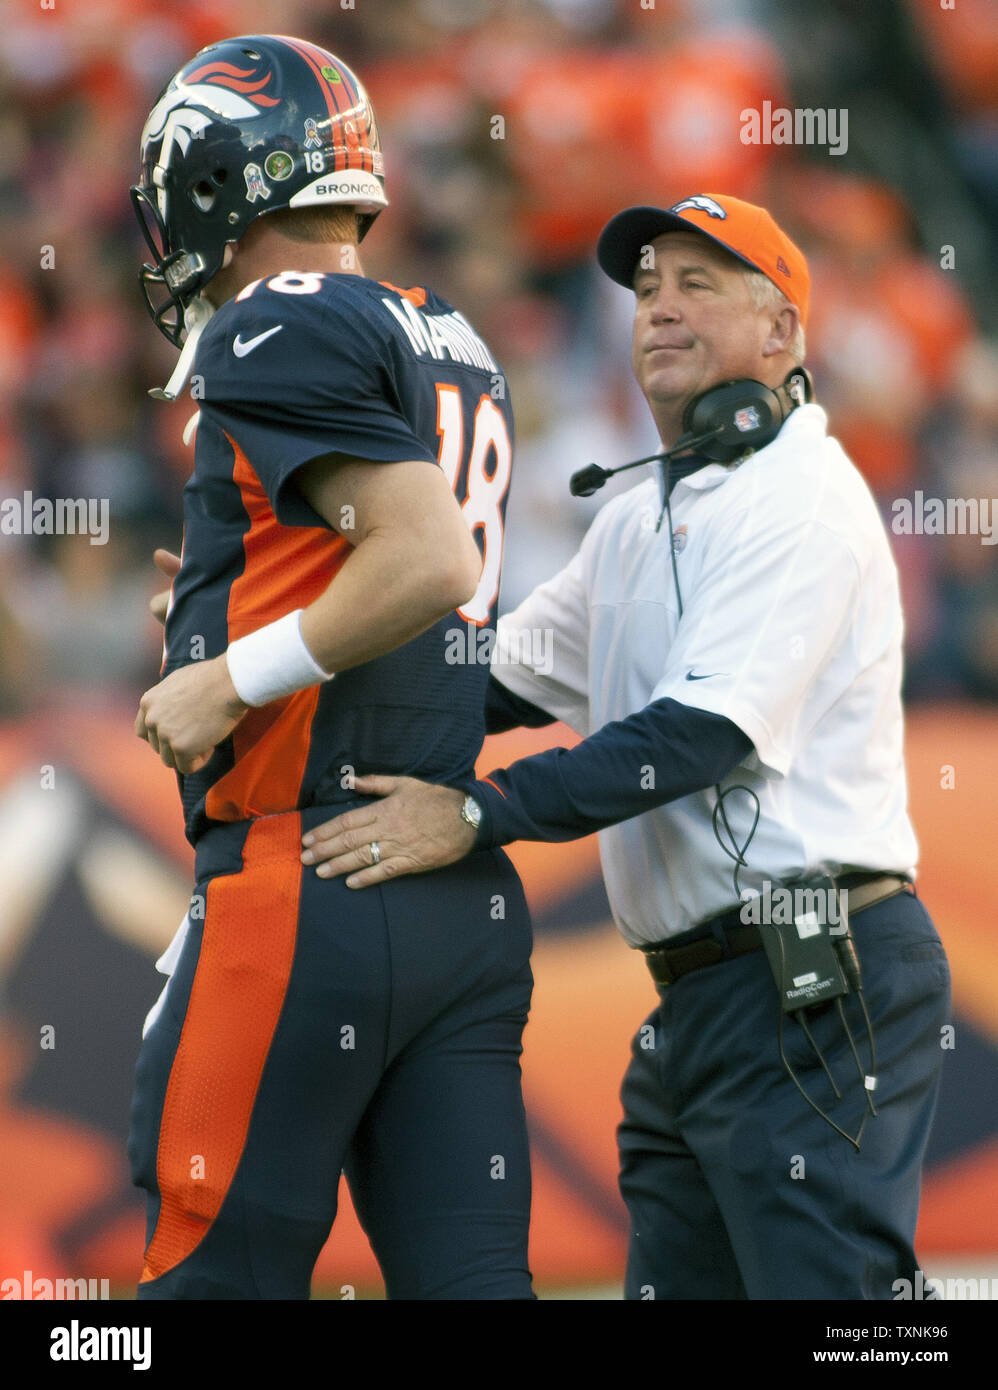 Denver Broncos head coach John Fox congratulates quarterback Peyton Manning after his second quarter touchdown pass gave him sole possession of second place for the NFL's most touchdown passes during the game against the San Diego Chargers at Sports Authority Field at Mile High on November 18, 2012 in Denver.  Manning passed Miami Dolphins quarterback Dan Marino.    UPI/Gary C. Caskey Stock Photo